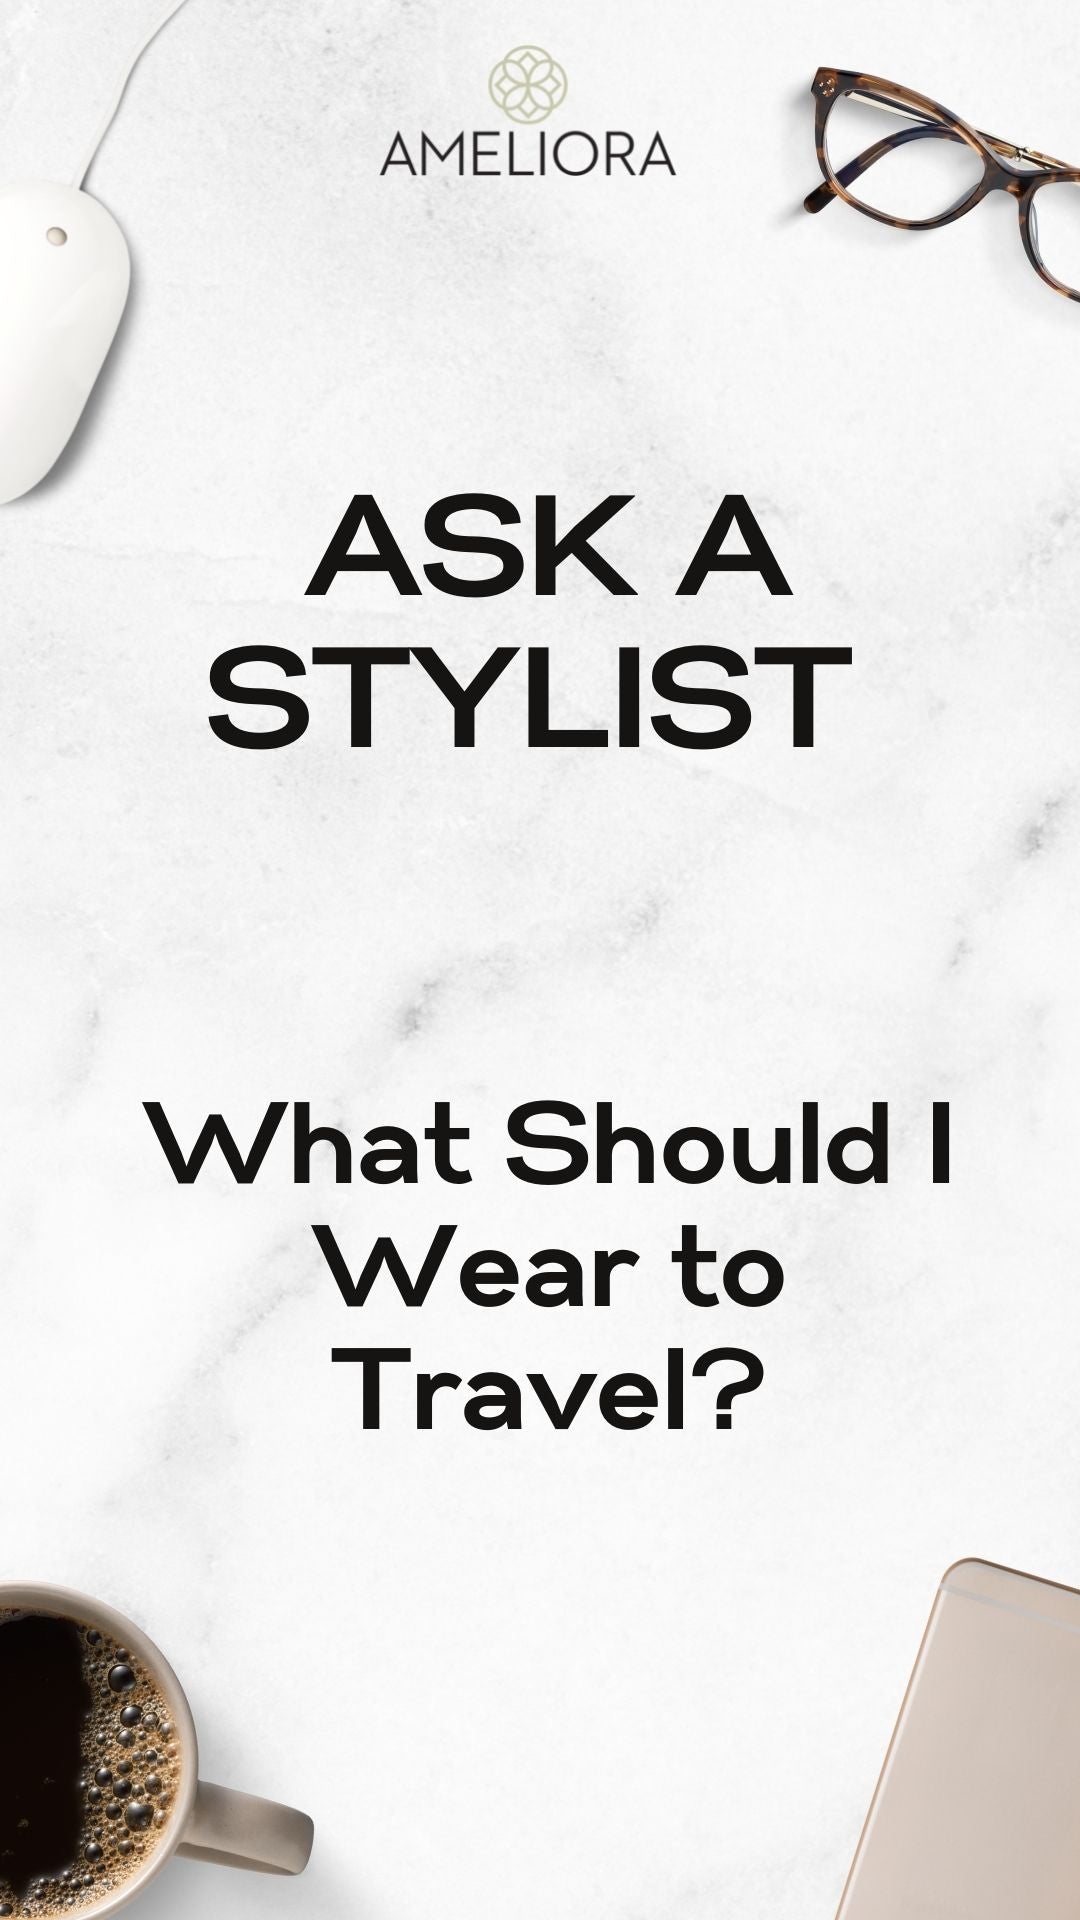 What Should I Wear To Travel?